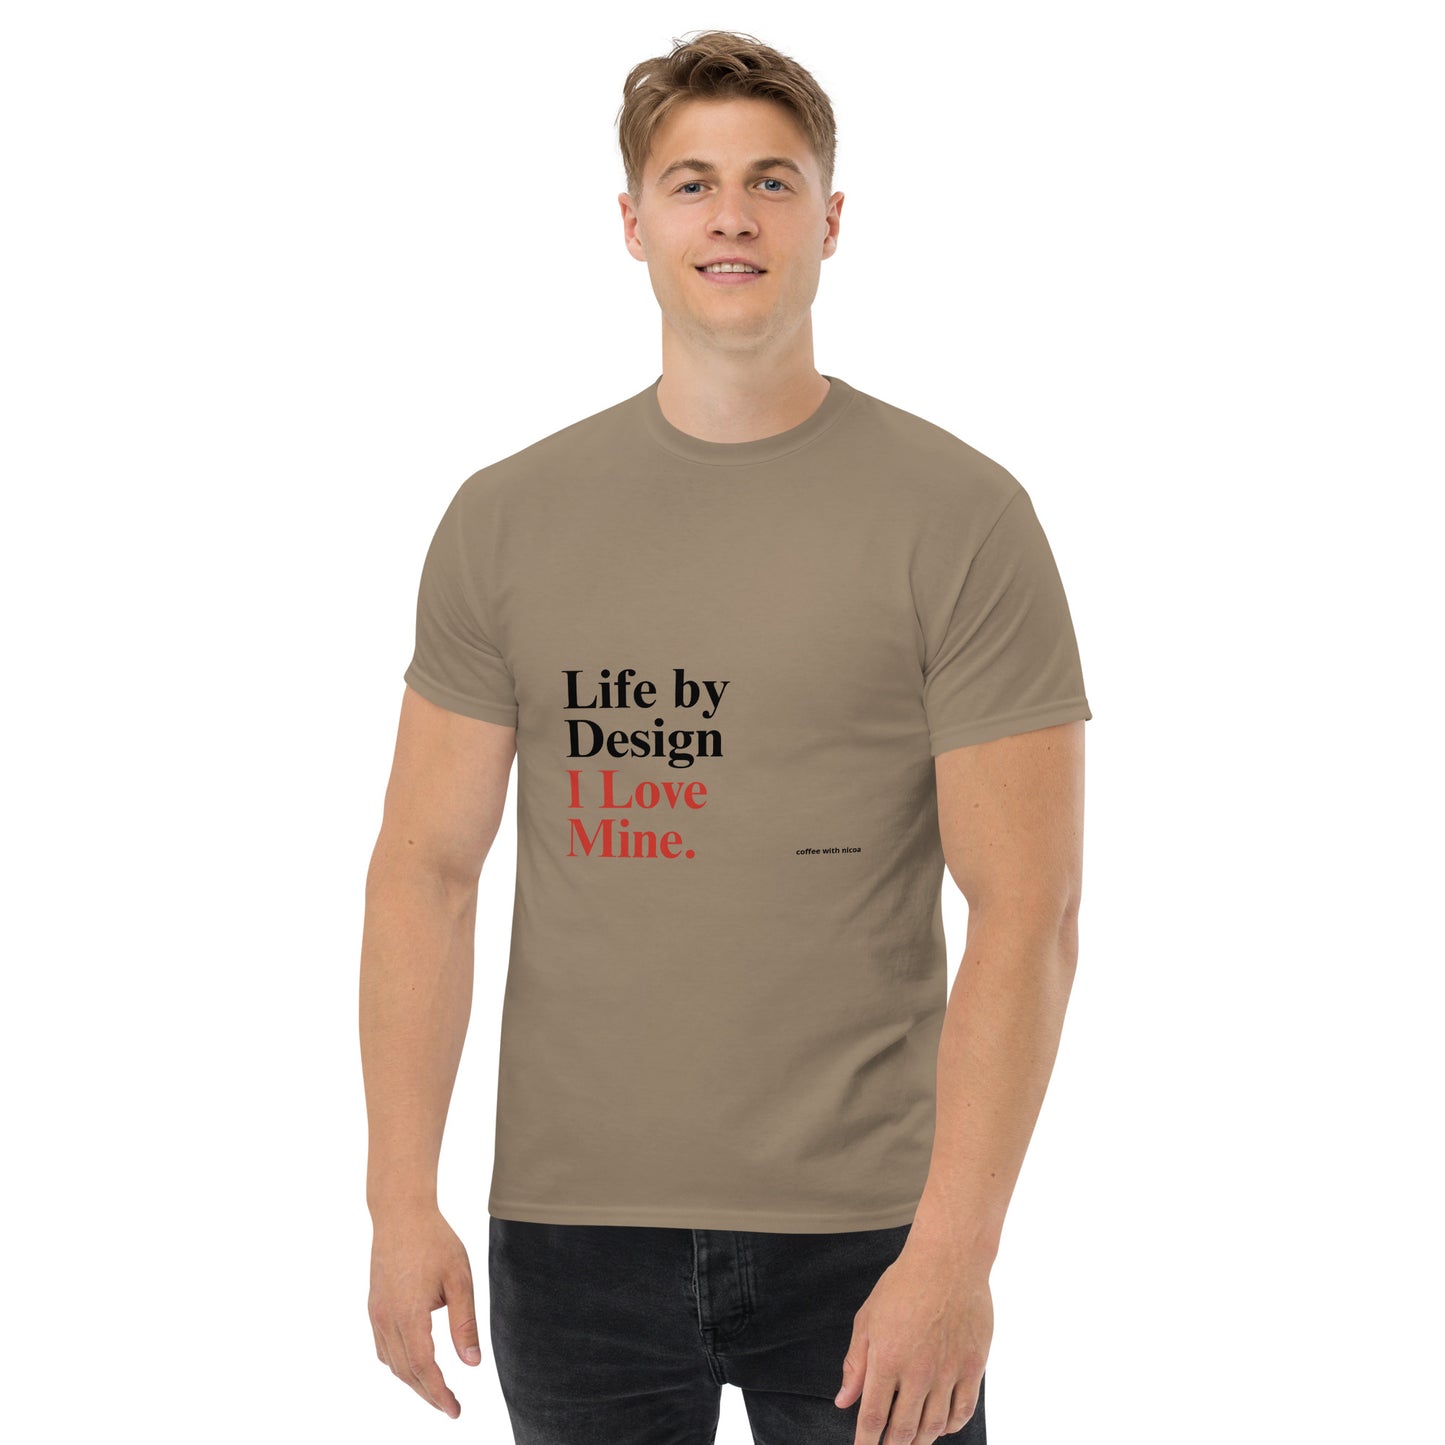 LIFE BY DESIGN Men's classic tee